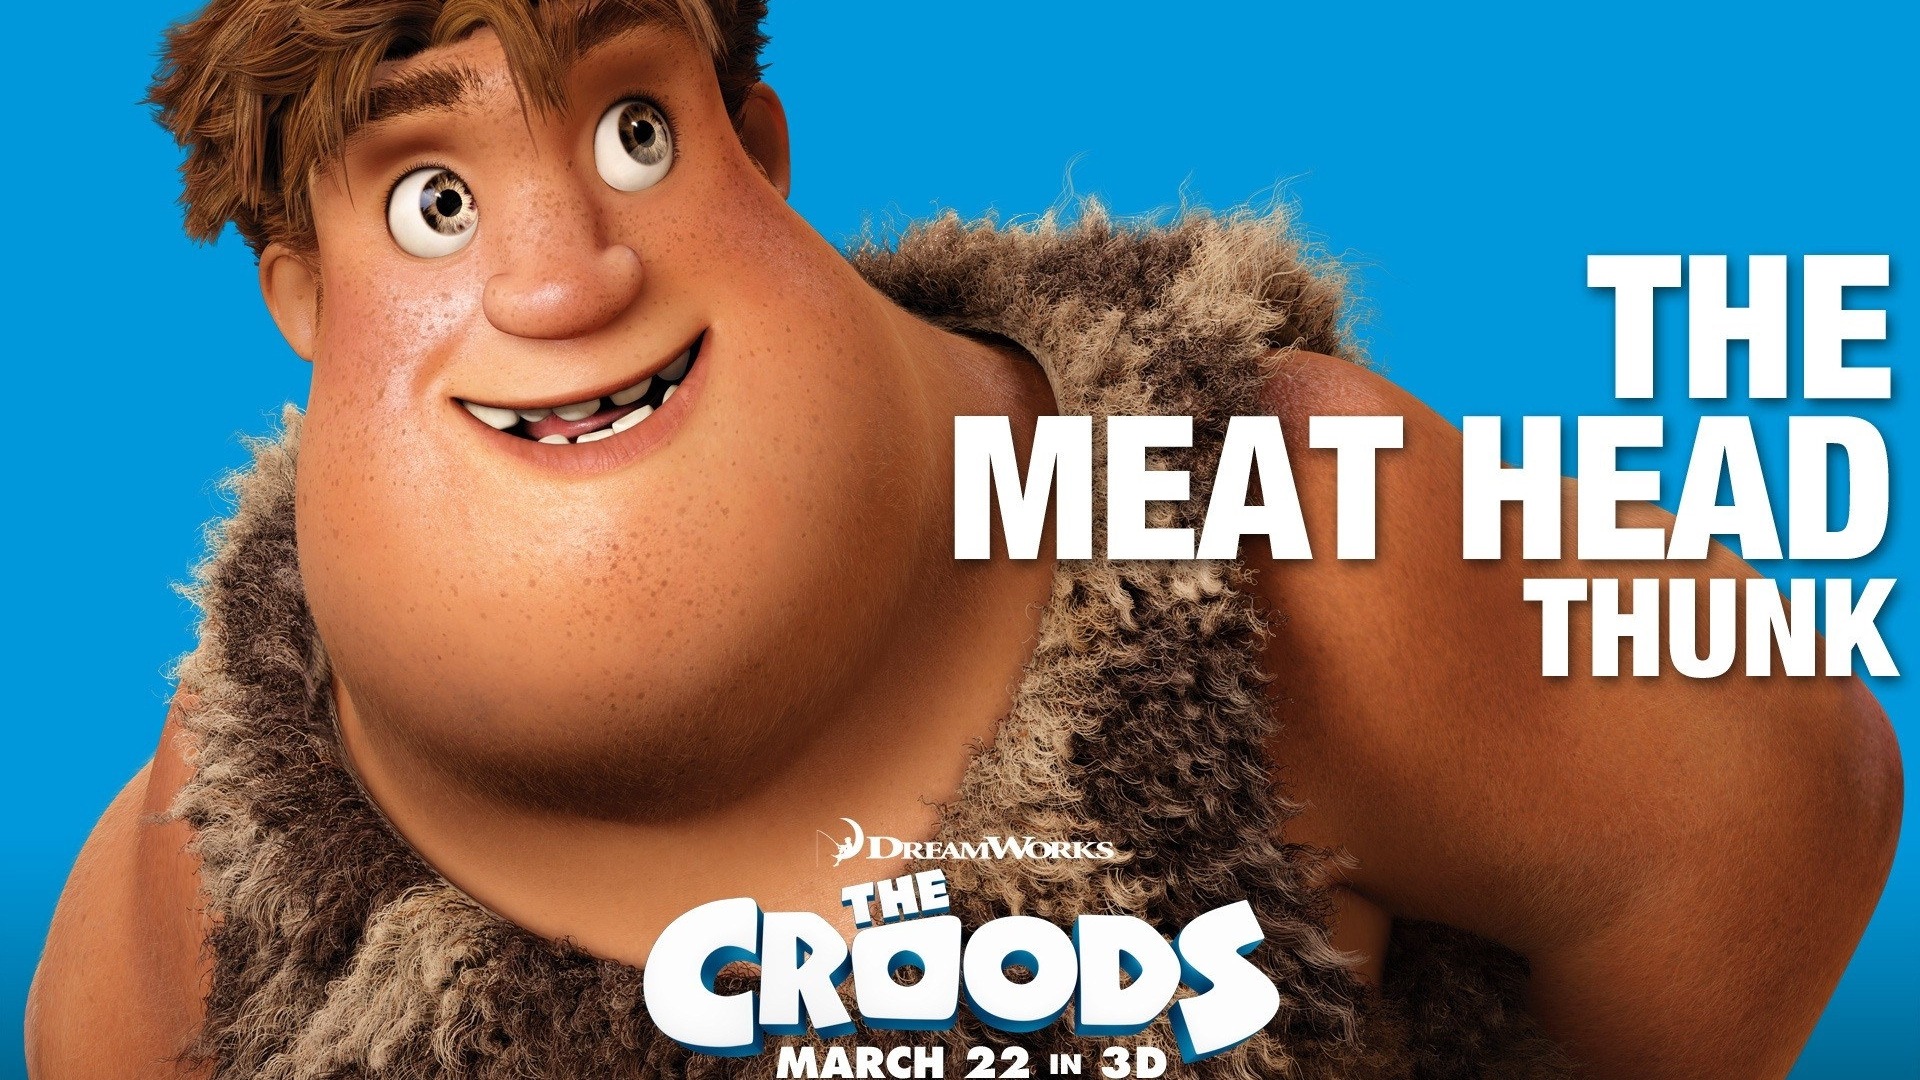 V Croods HD Movie Wallpapers #13 - 1920x1080